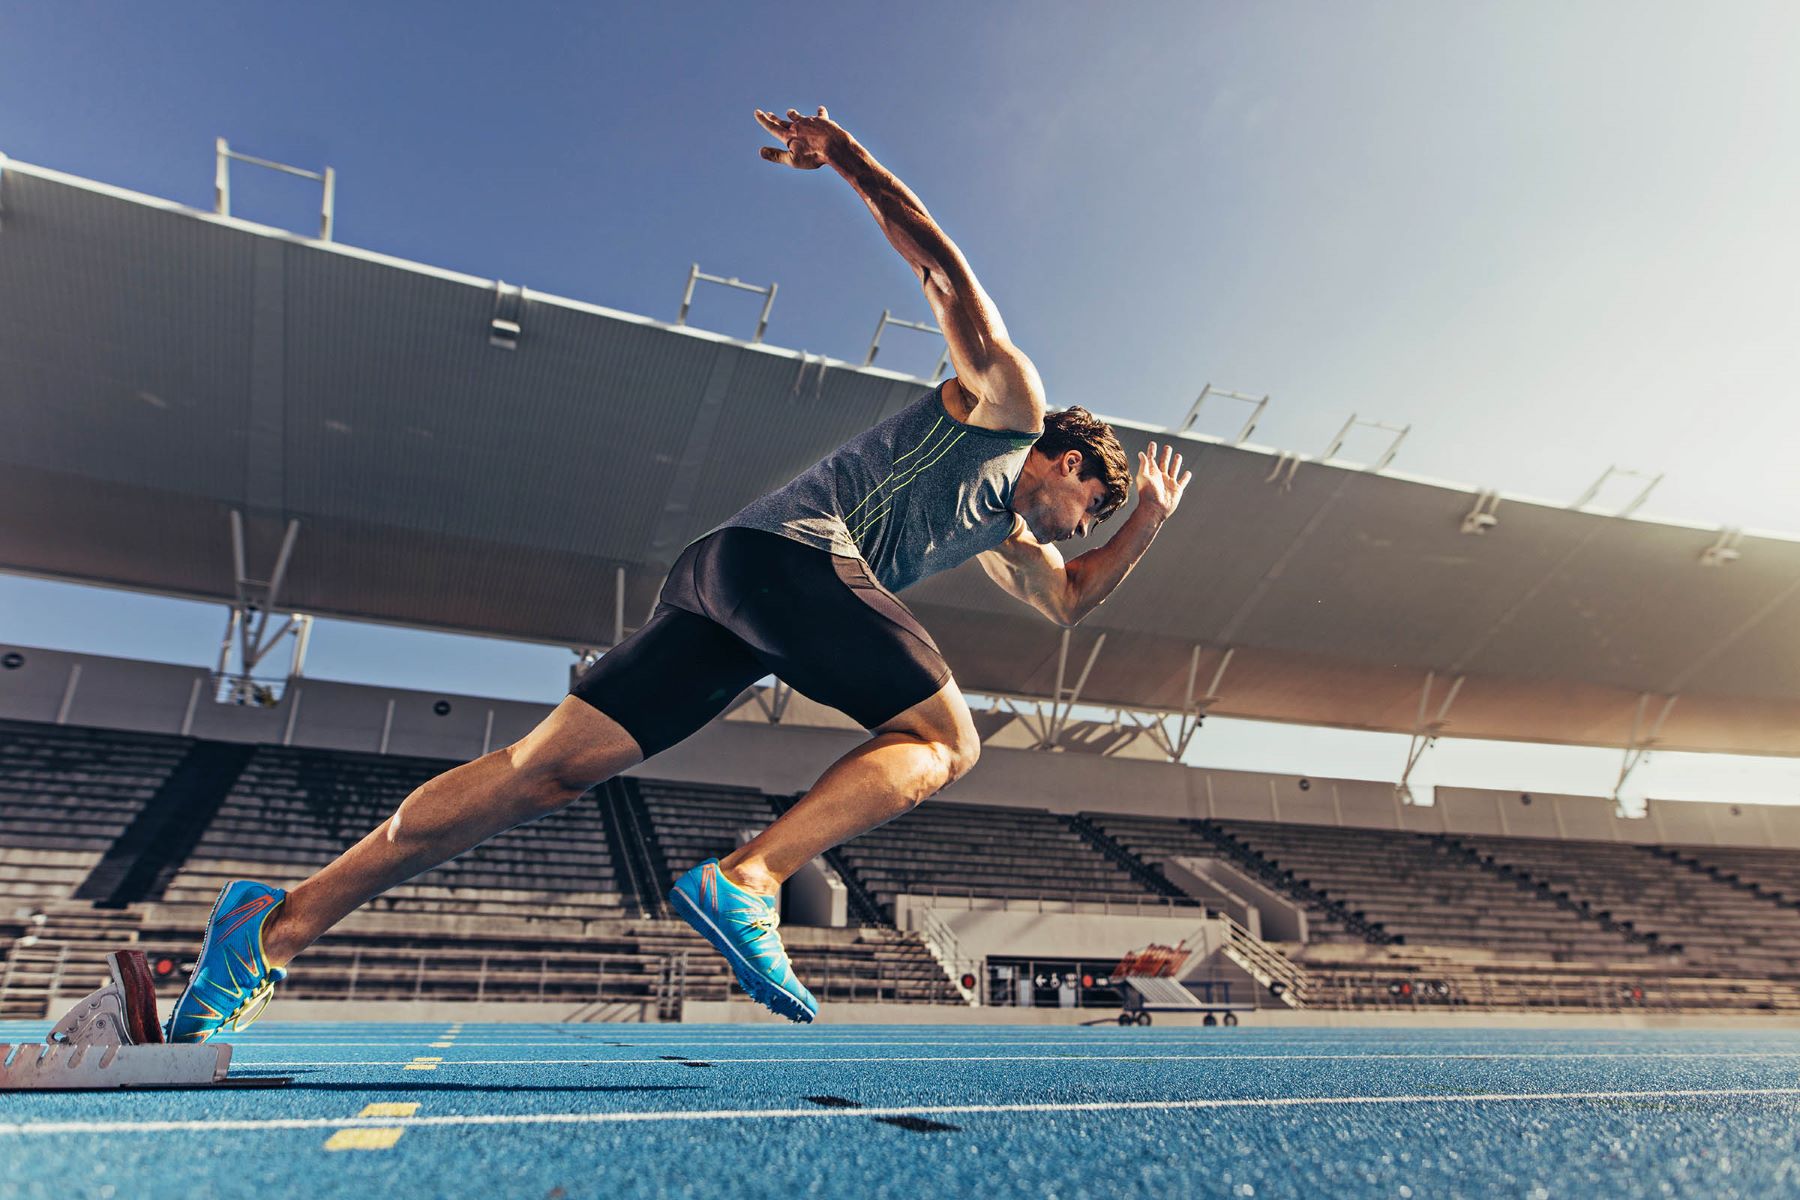 How To Master The Drive Phase In Track And Field